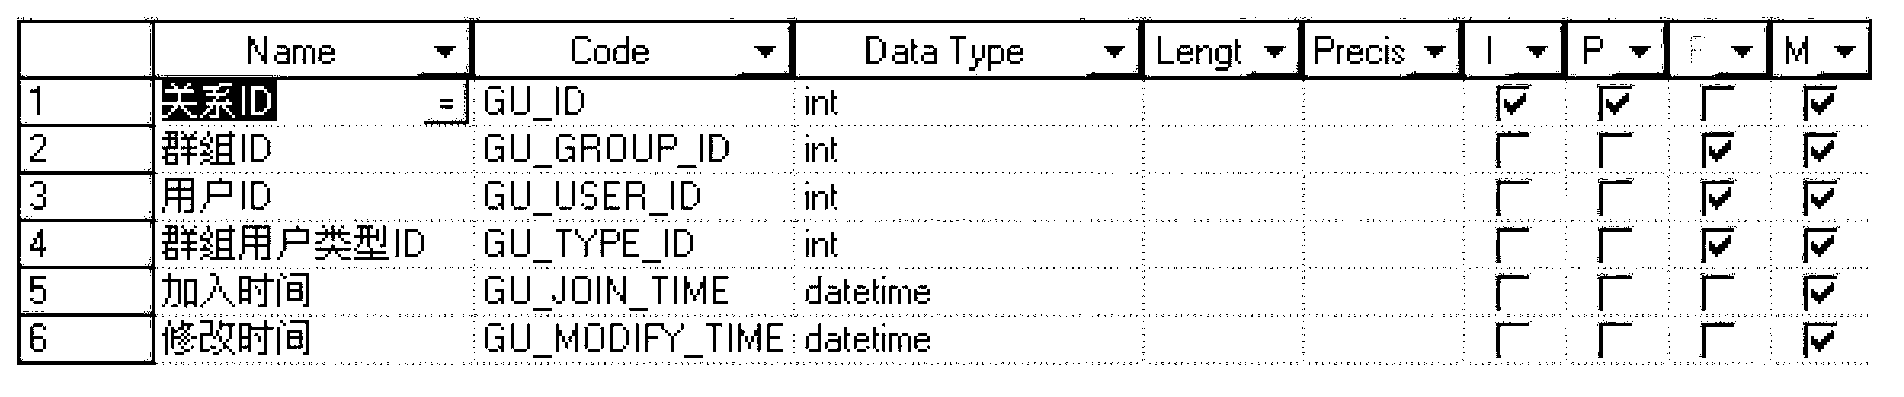 Incremental data capturing and extraction method based on timestamps and logs